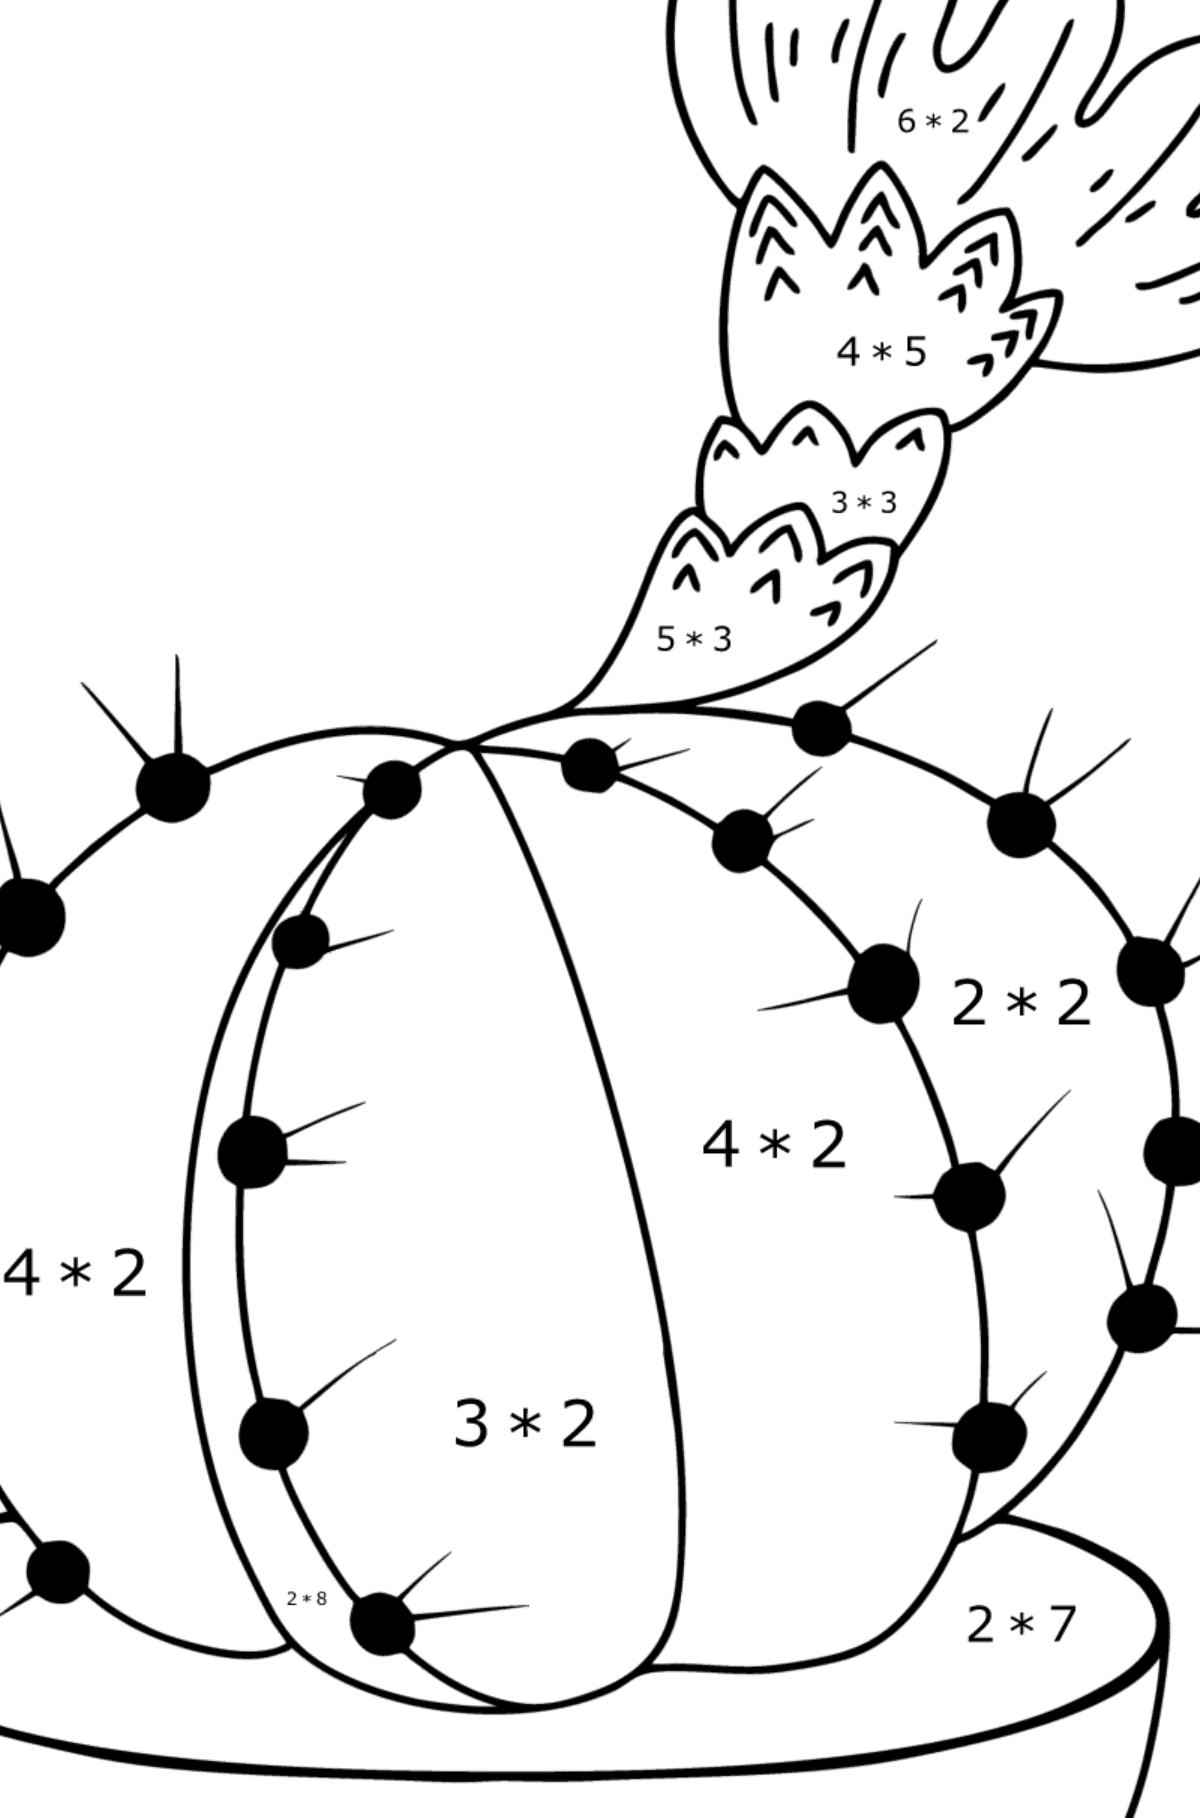 Cute cactus coloring pages - Math Coloring - Multiplication for Kids